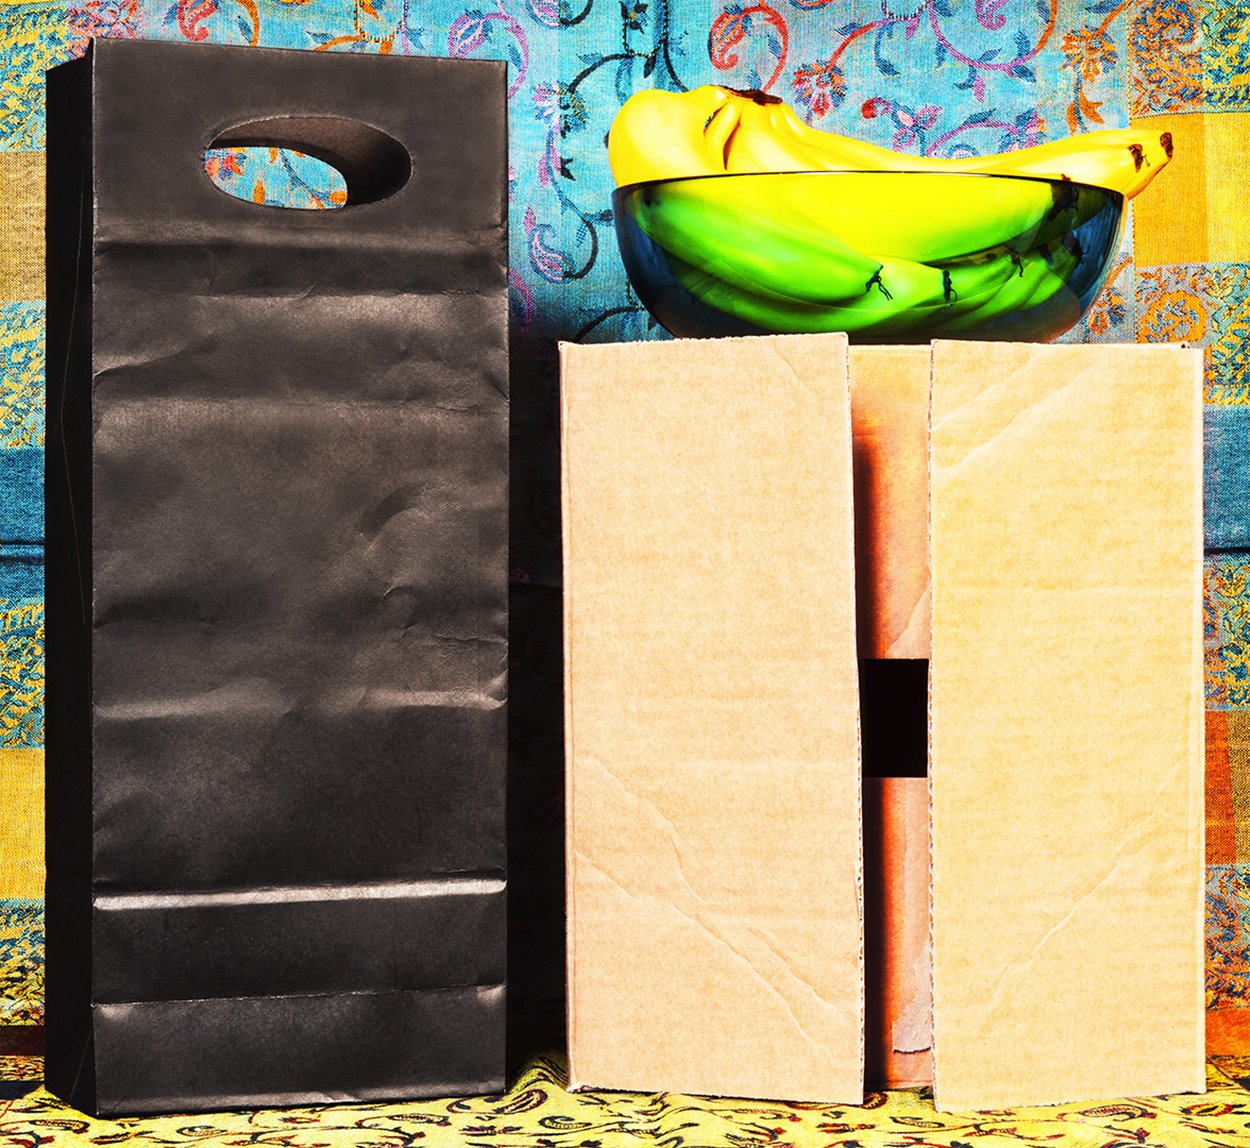    Chance Encounters  gallery   A Wine Bag, A Wine Box &amp; A Bowl of Bananas  2023 90cm x 98cm  